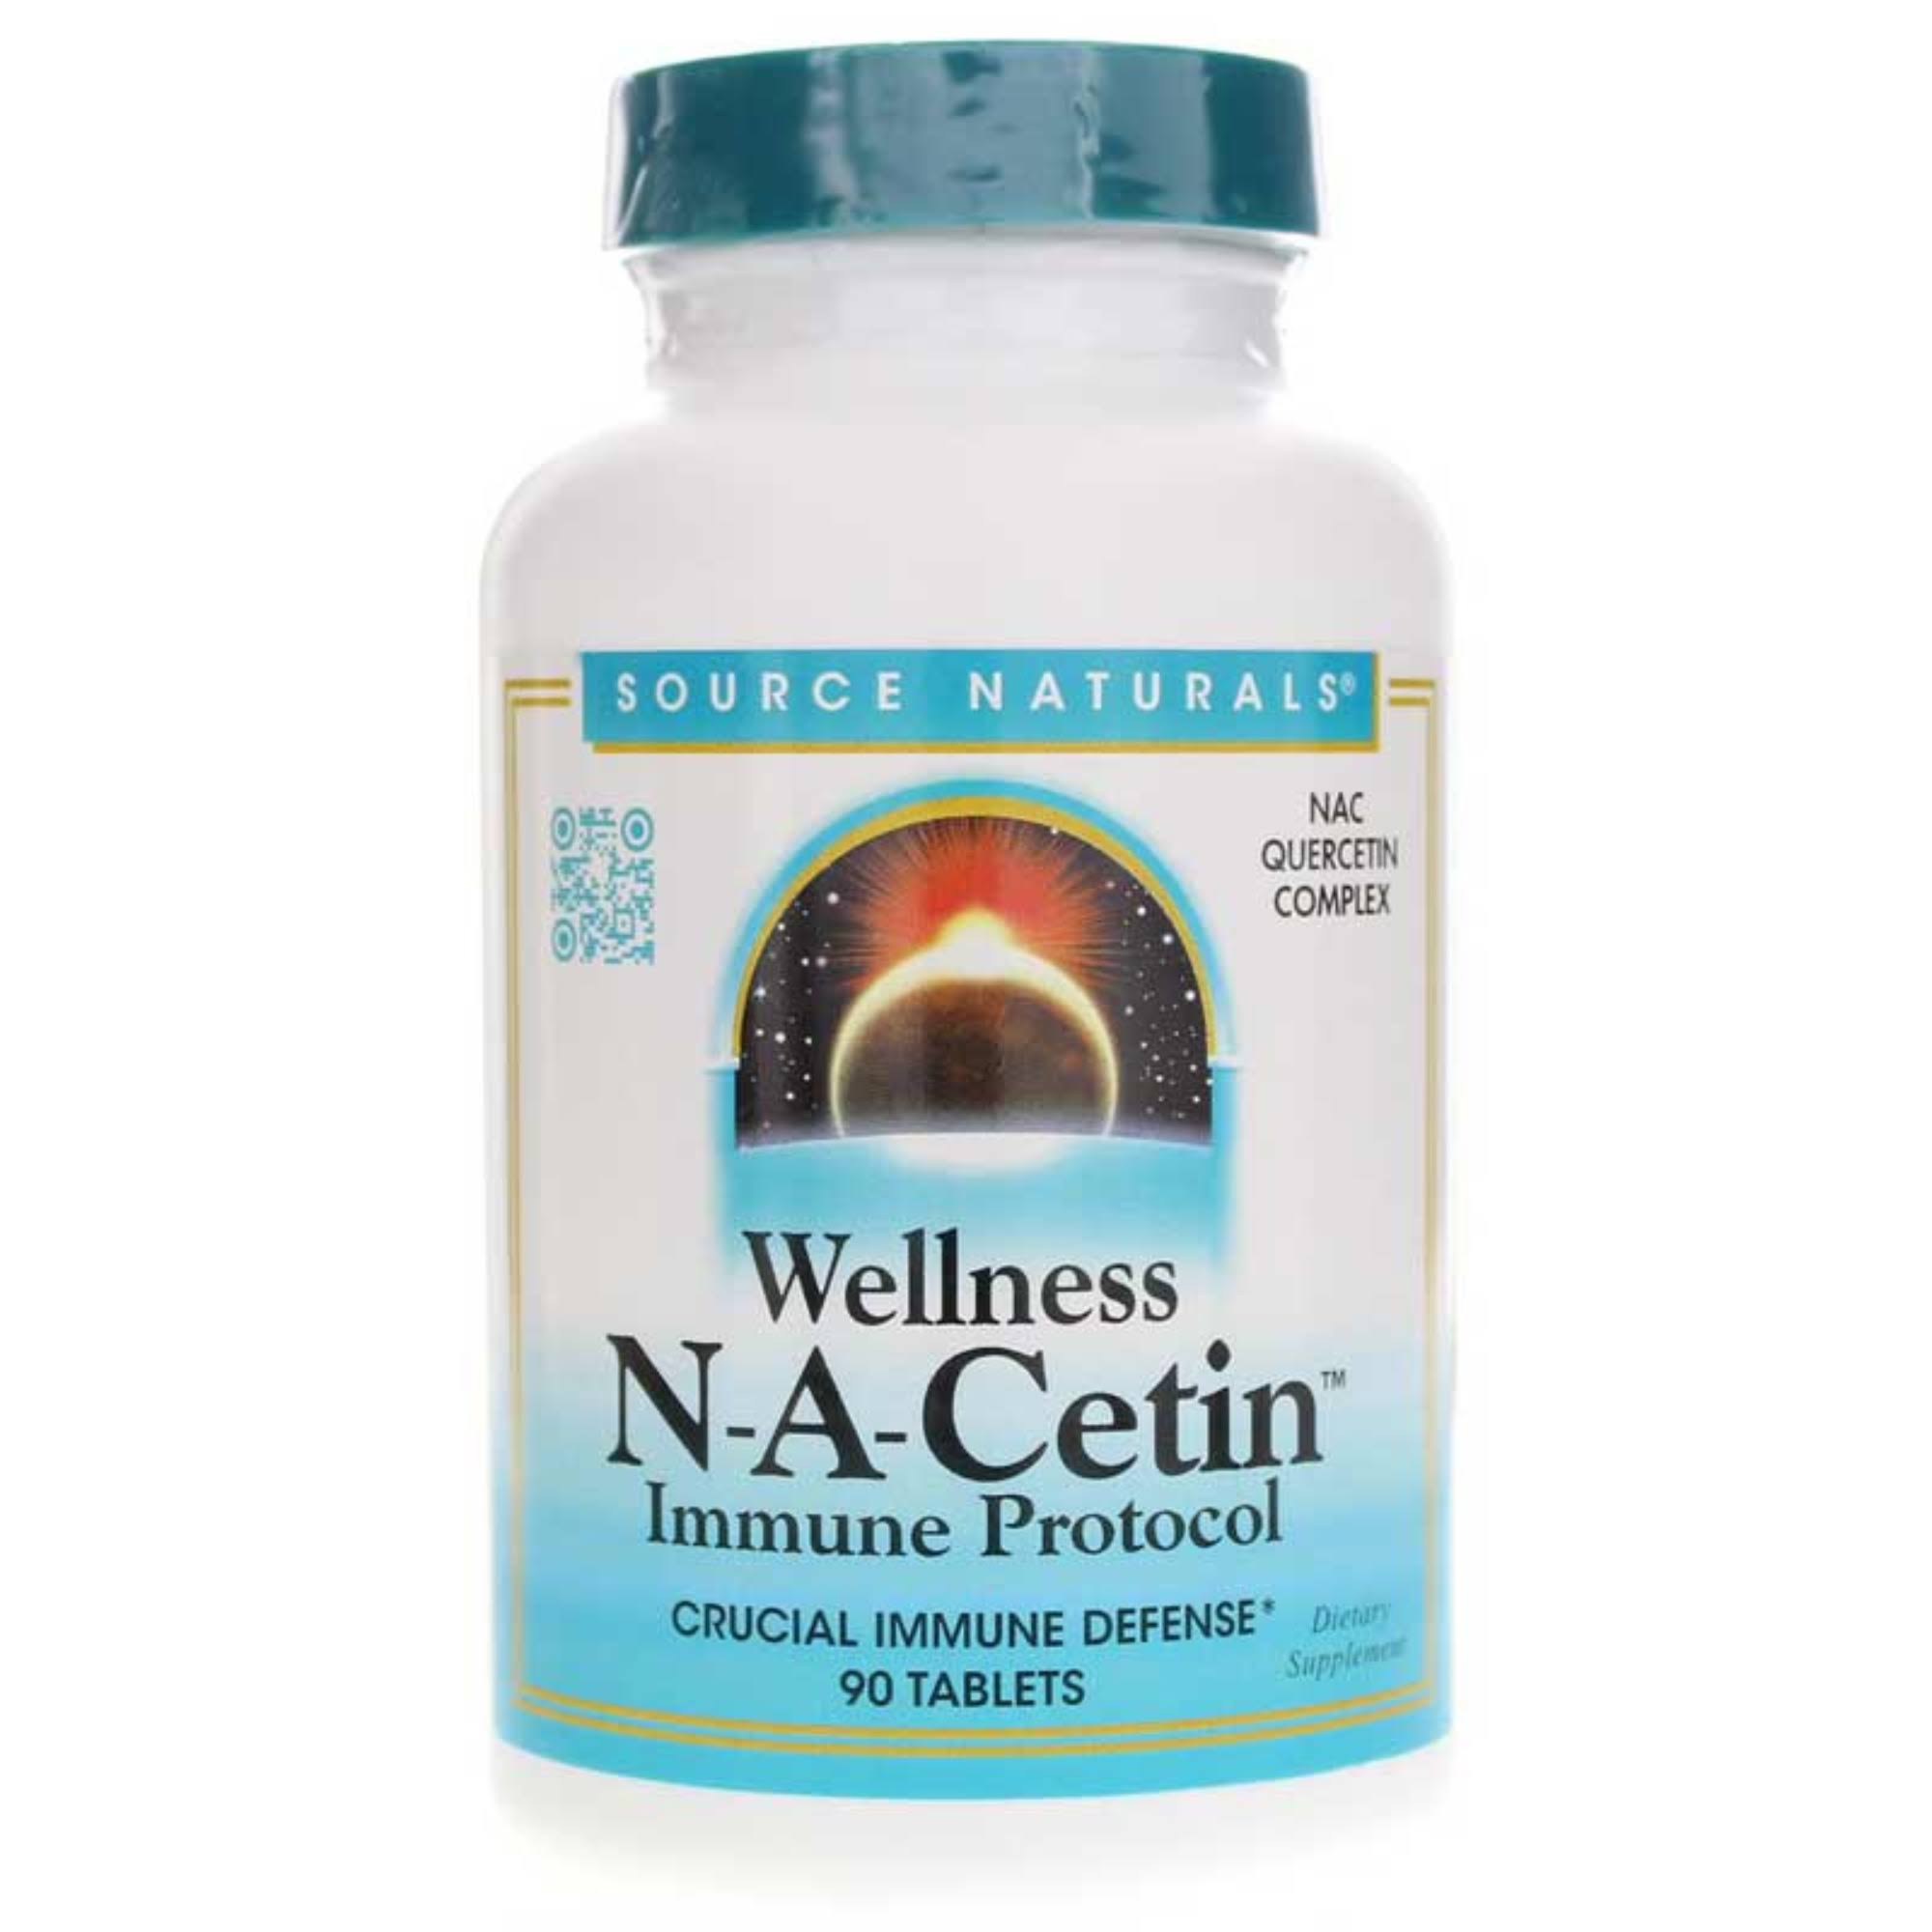 Source Naturals - Wellness N-A-Cetin Immune Protocol - 90 Tablets